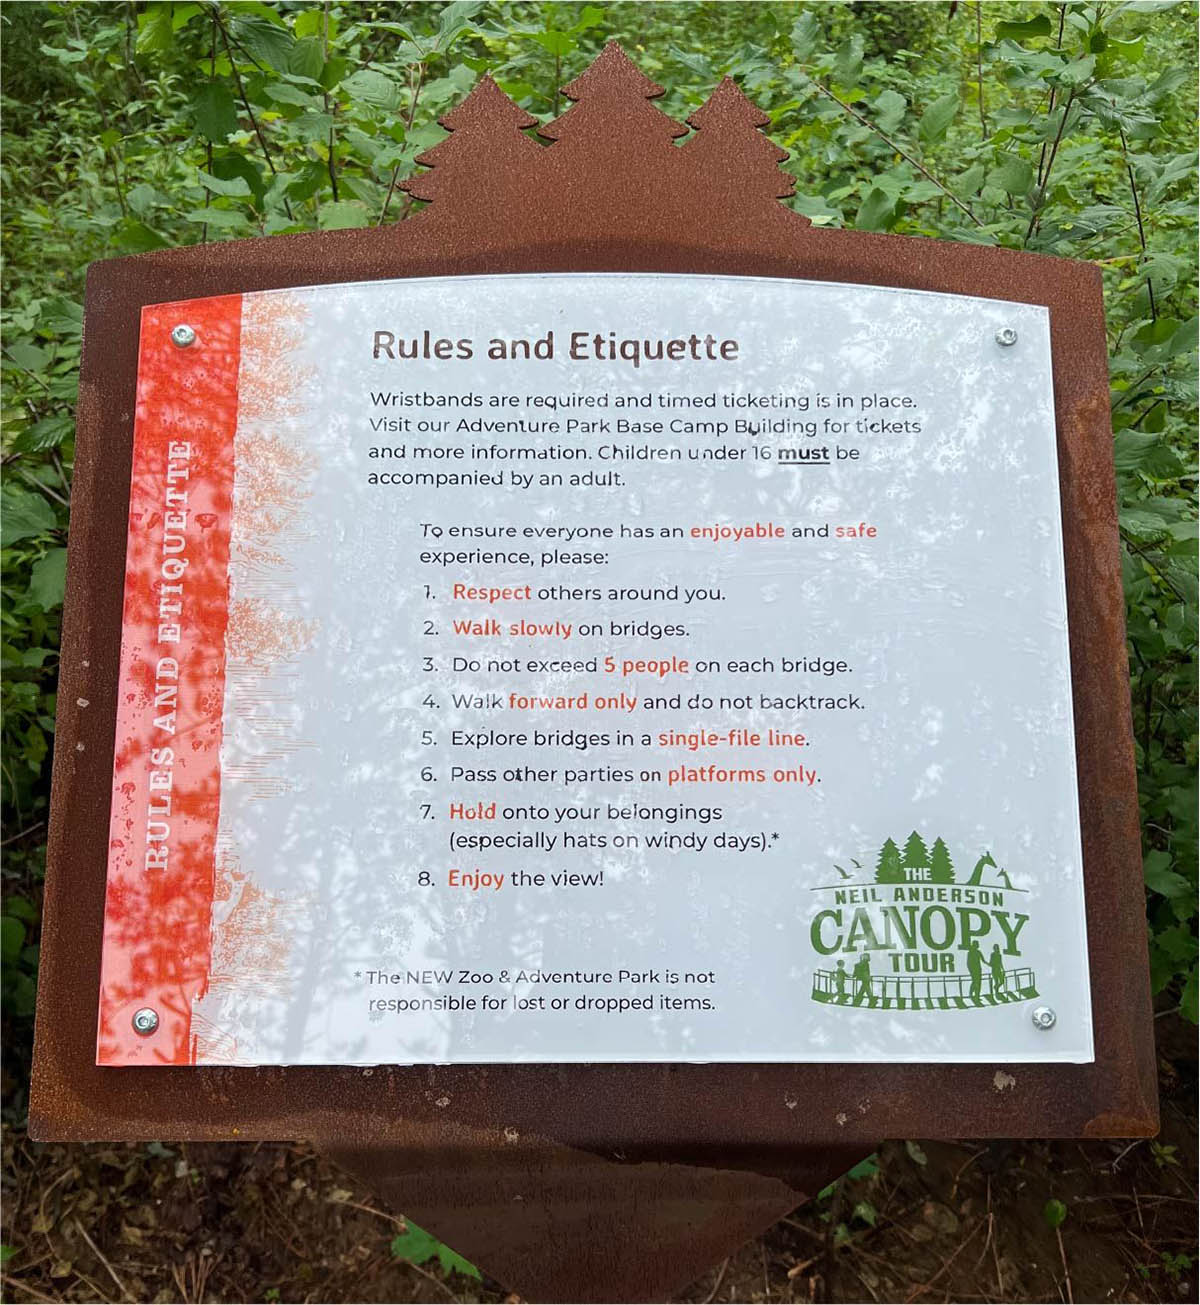 NEW Zoo Canopy Tour Rules and Etiquette sign